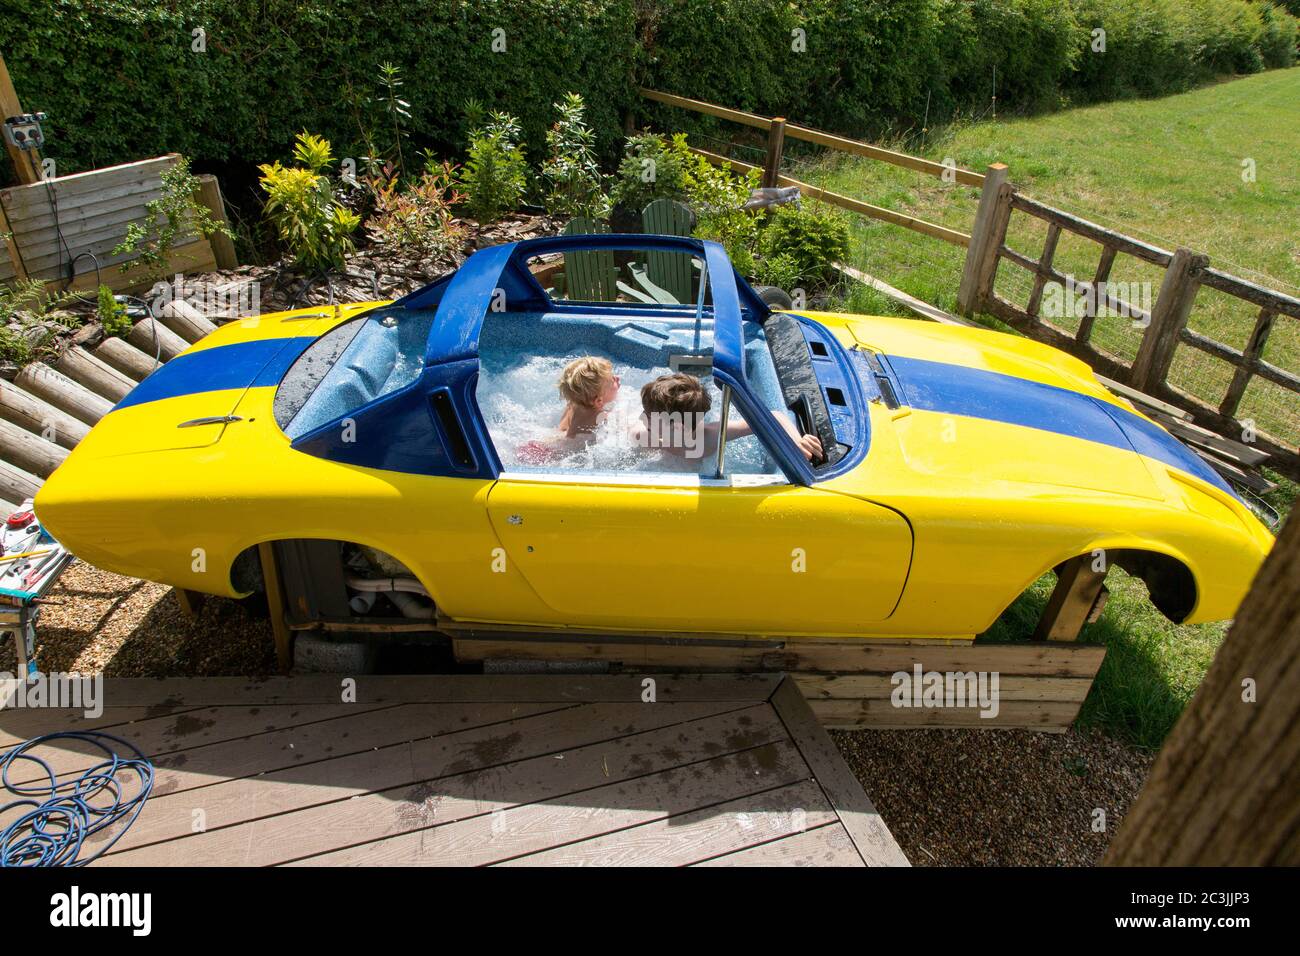 Testing a Lotus Elan +2 classic car being converted into a custom hot tub (unfinished), Medstead, Alton, Hampshire England, United Kingdom. Stock Photo